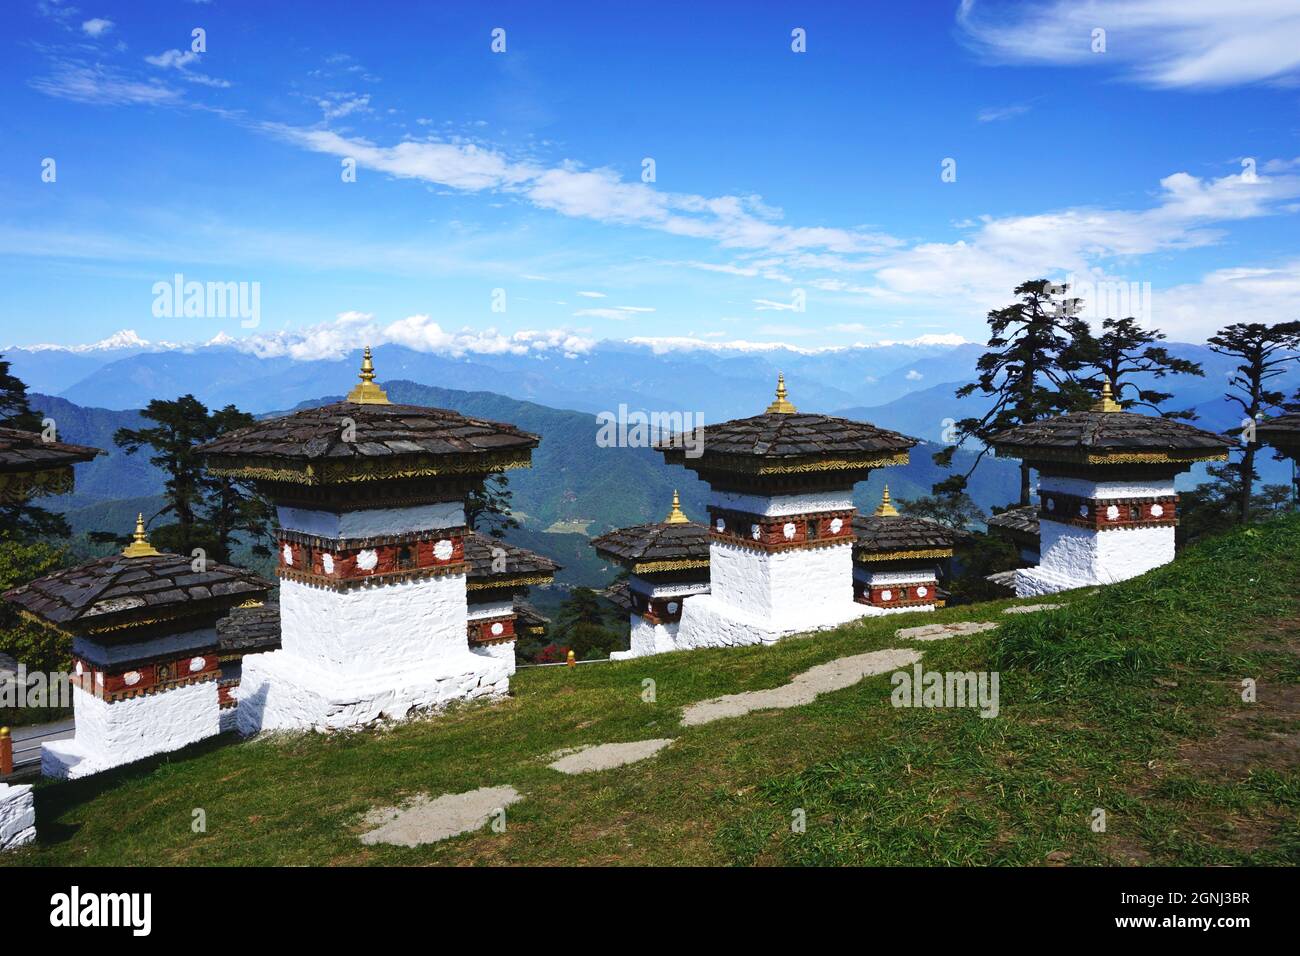 View of several of the Druk Wangyal Chortens at Bhutan’s Dochula Pass, between Thimphu and Punakha, with the snow-covered Himalaya mountains beyond Stock Photo